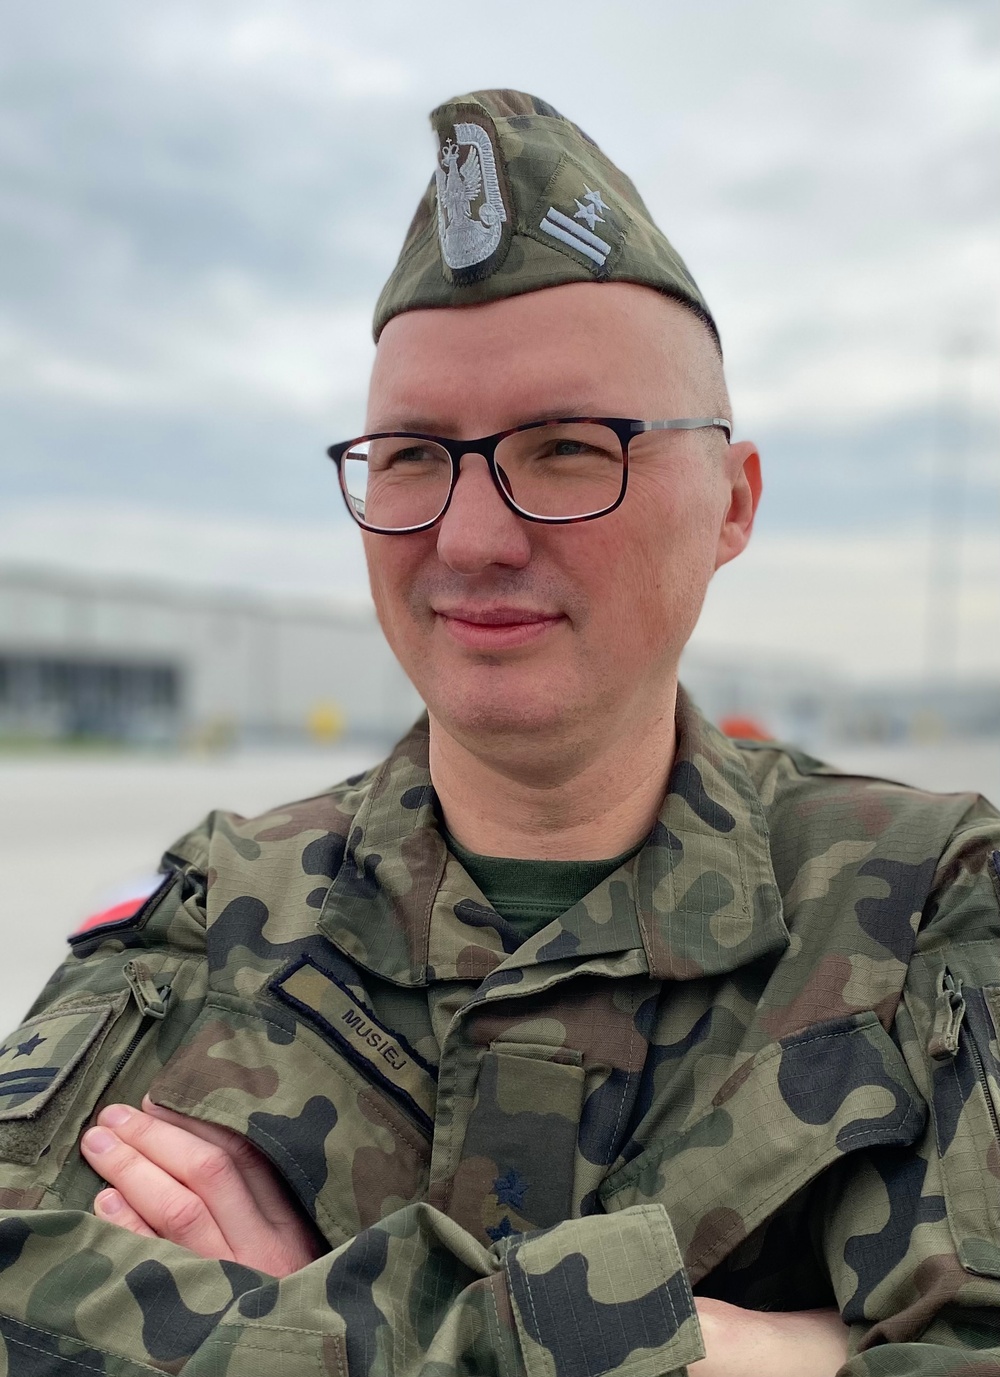 Polish Army officer responsible for primary workforce at new APS-2 site in Powidz